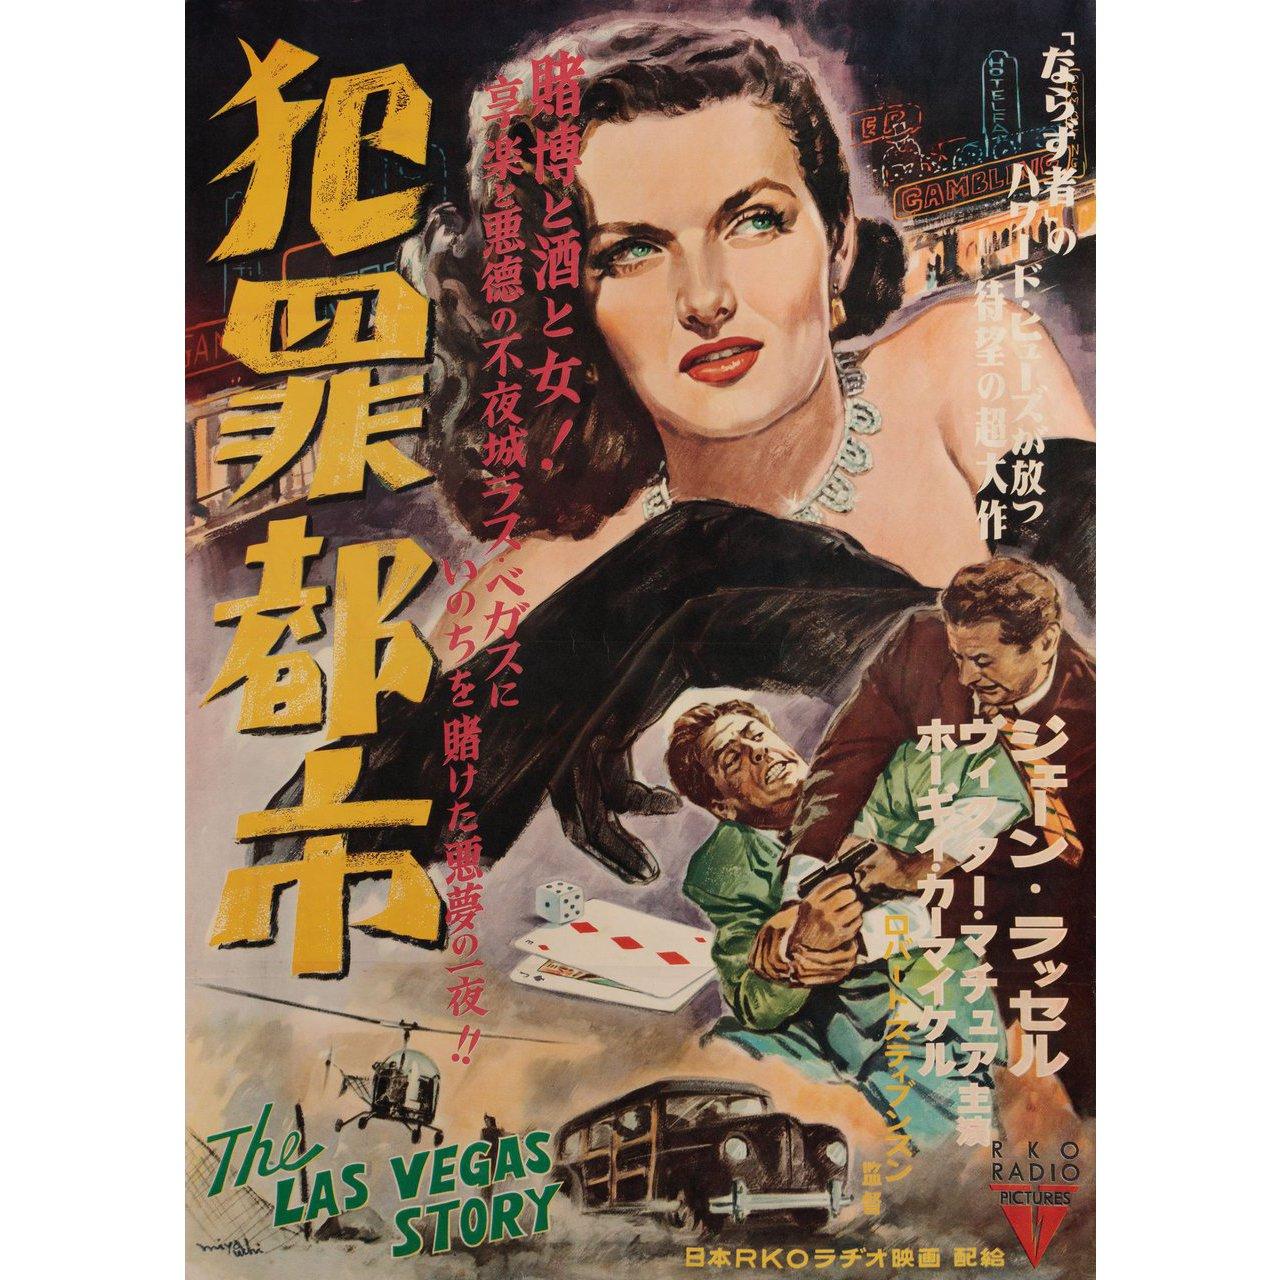 Original 1953 Japanese B2 poster by Miya Uchi for the film The Las Vegas Story directed by Robert Stevenson with Jane Russell / Victor Mature / Vincent Price / Hoagy Carmichael. Very Good-Fine condition, folded. Many original posters were issued